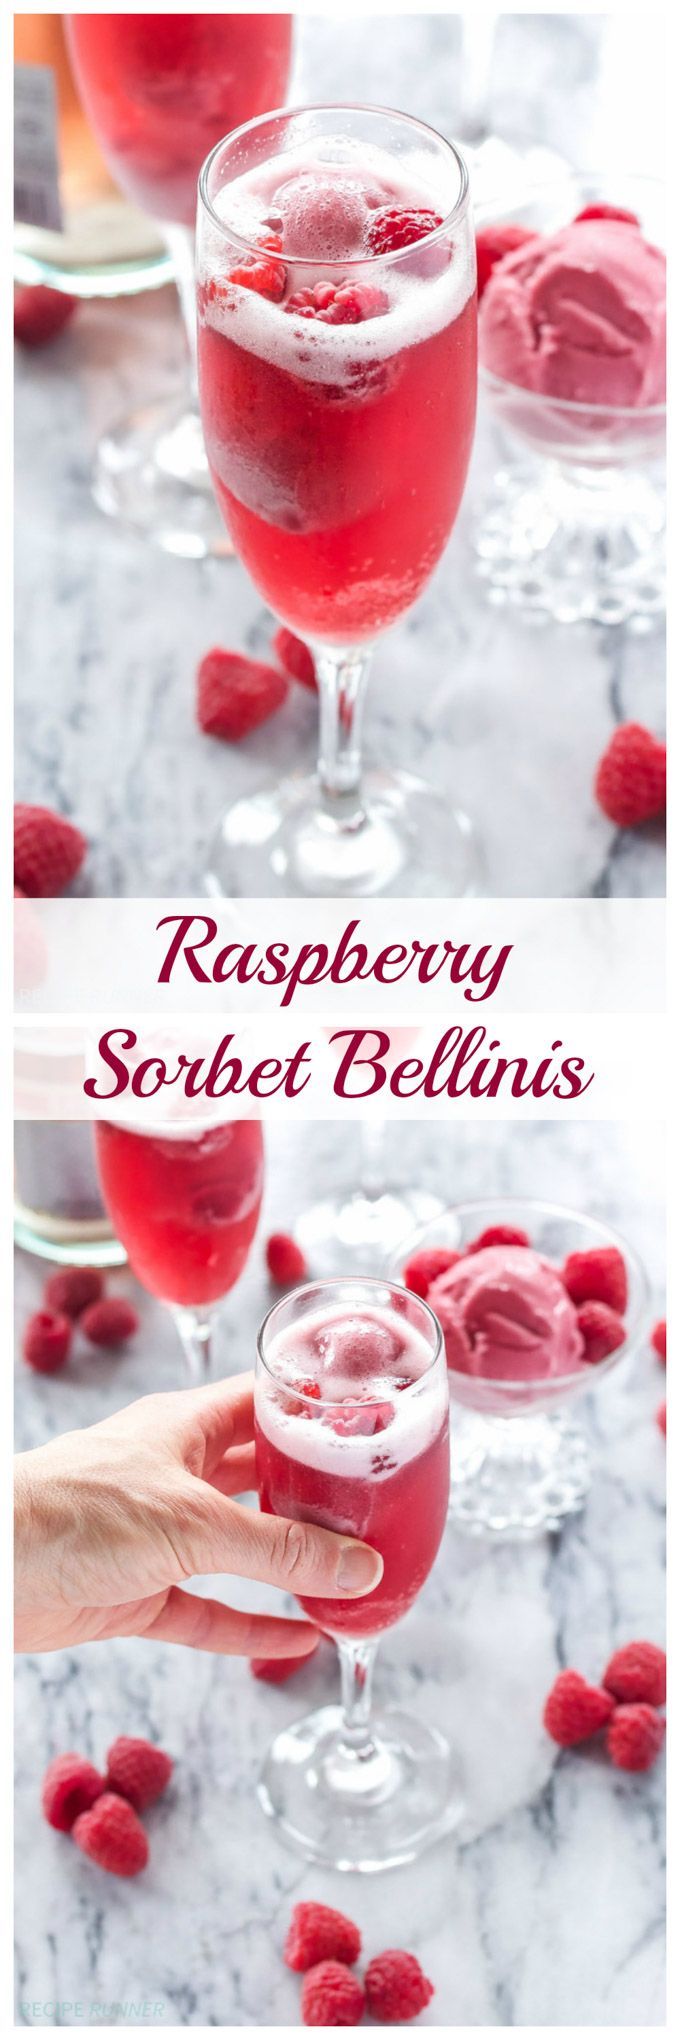 Raspberry Sorbet Bellinis | 3 ingredients is all you need to make these pretty and